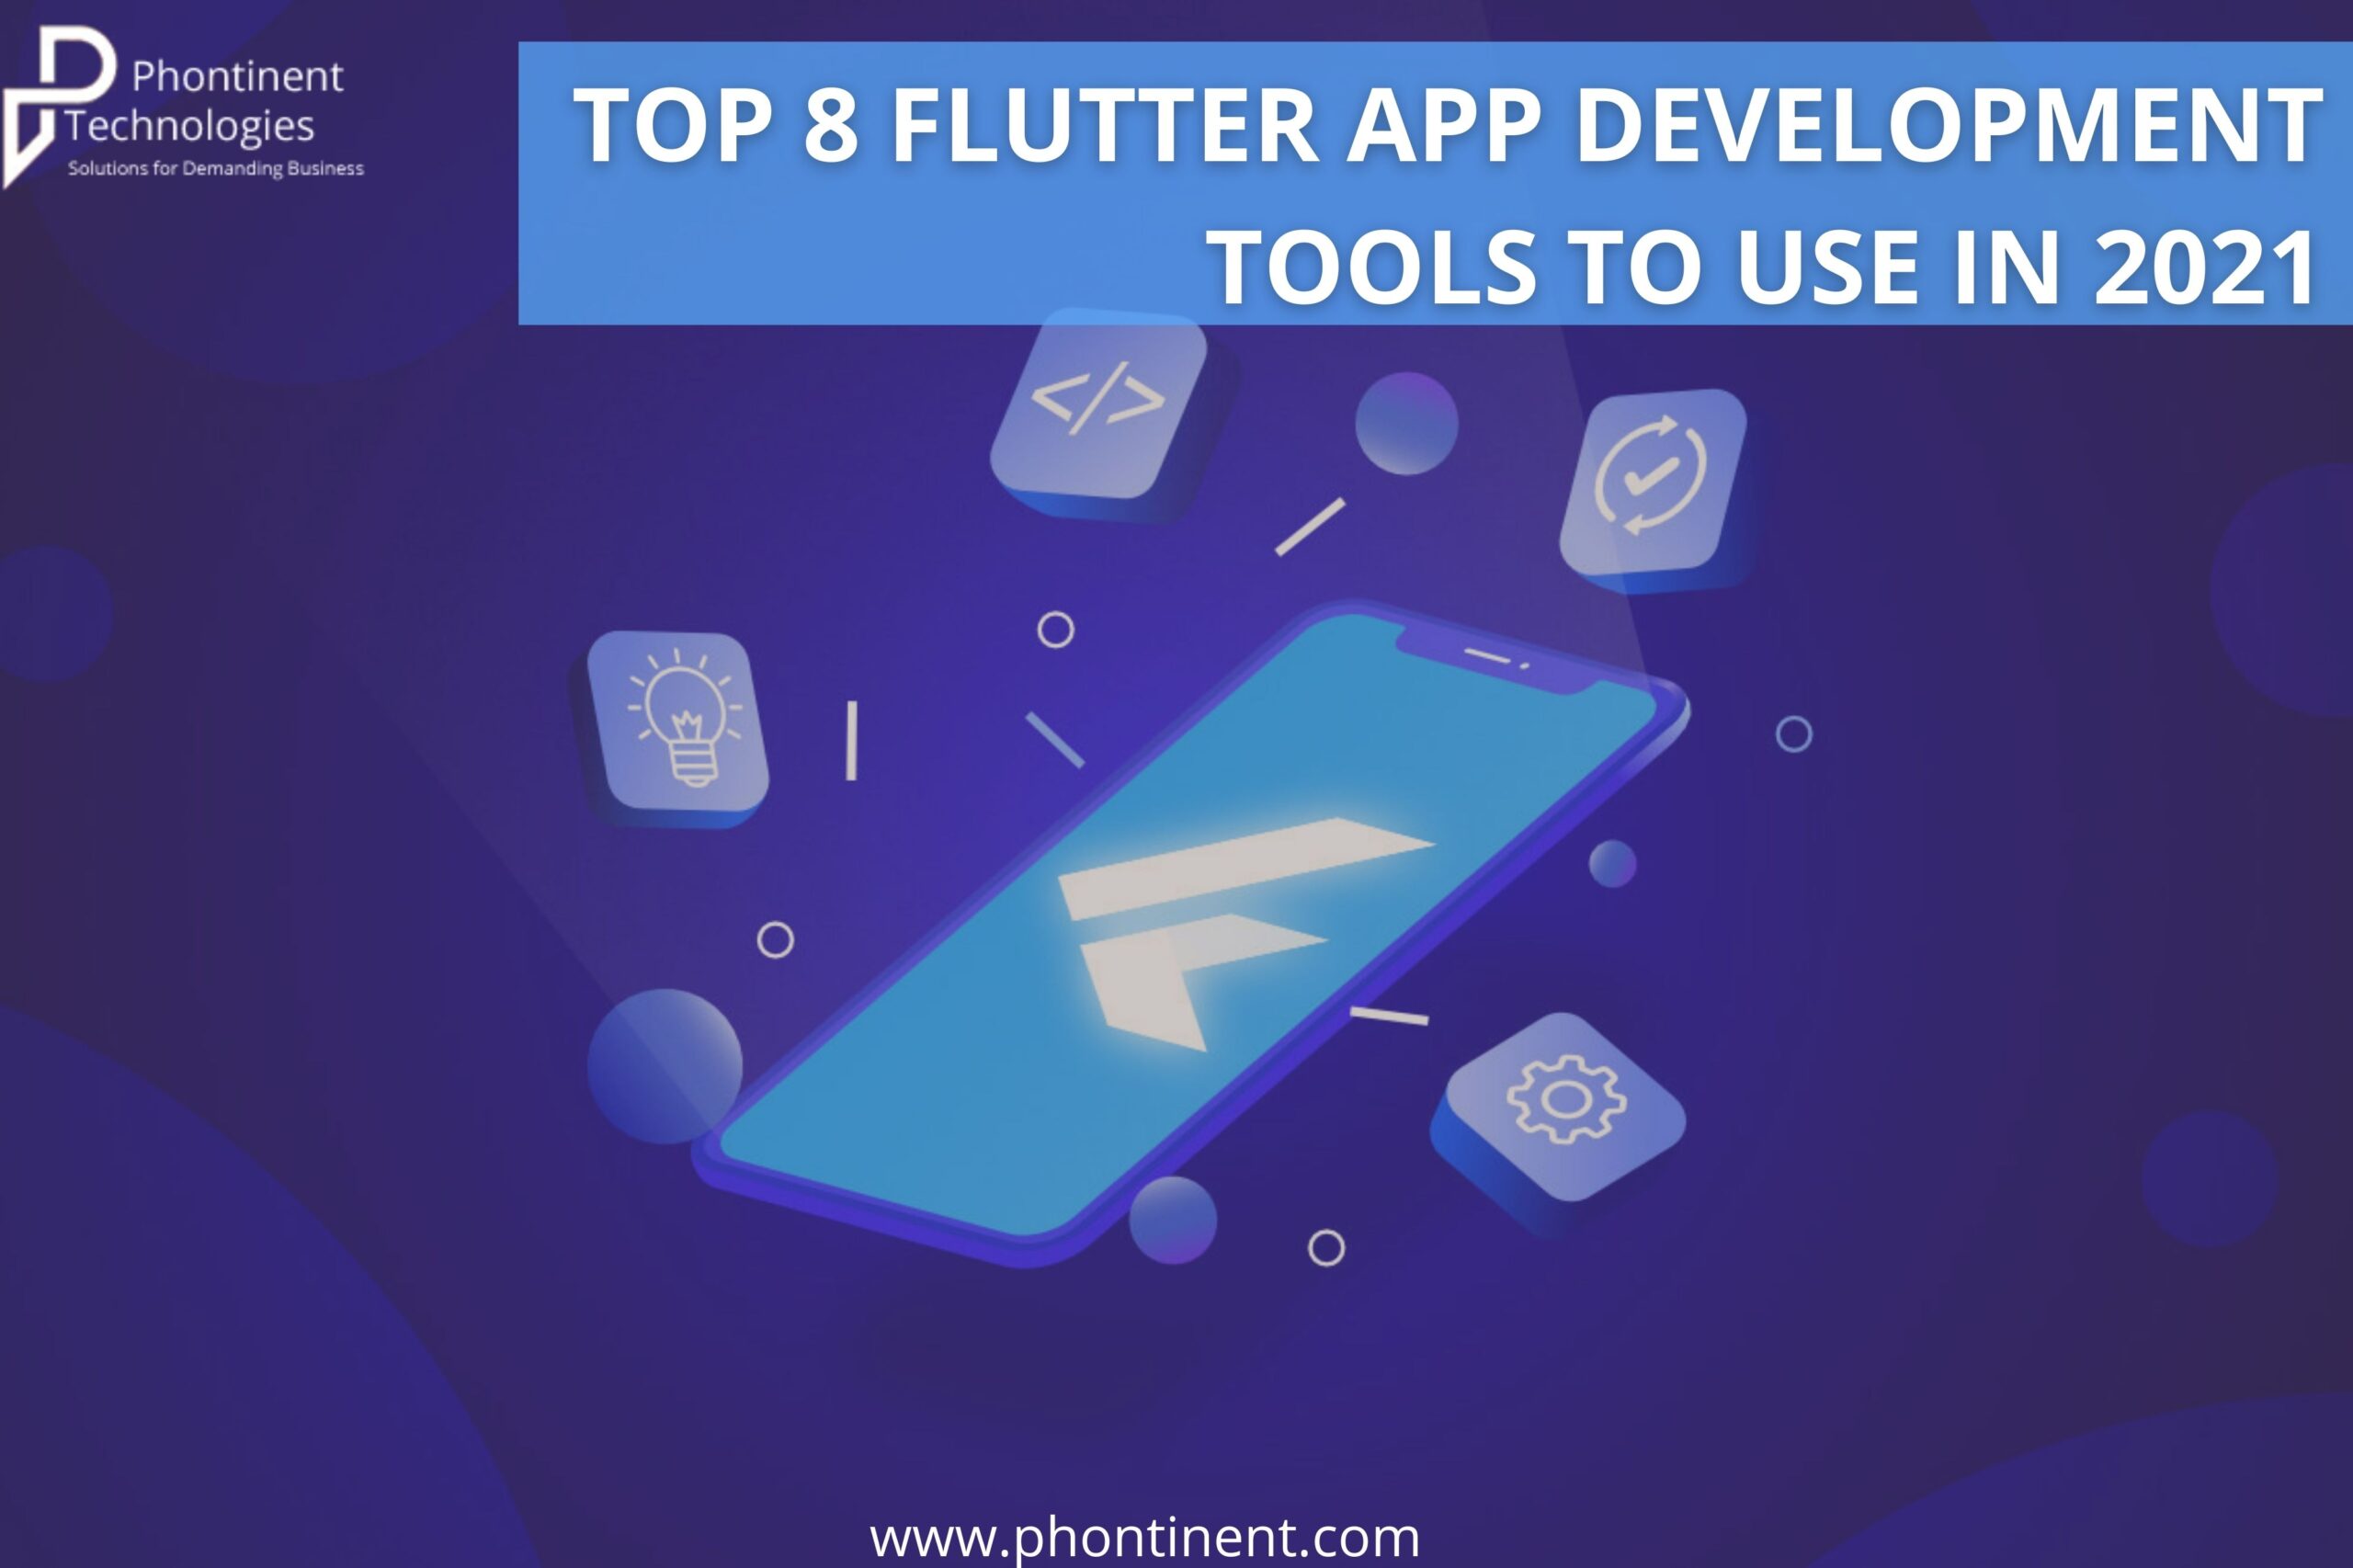 Top 8 Flutter App Development Tools to Use in 2021 - Official Blog